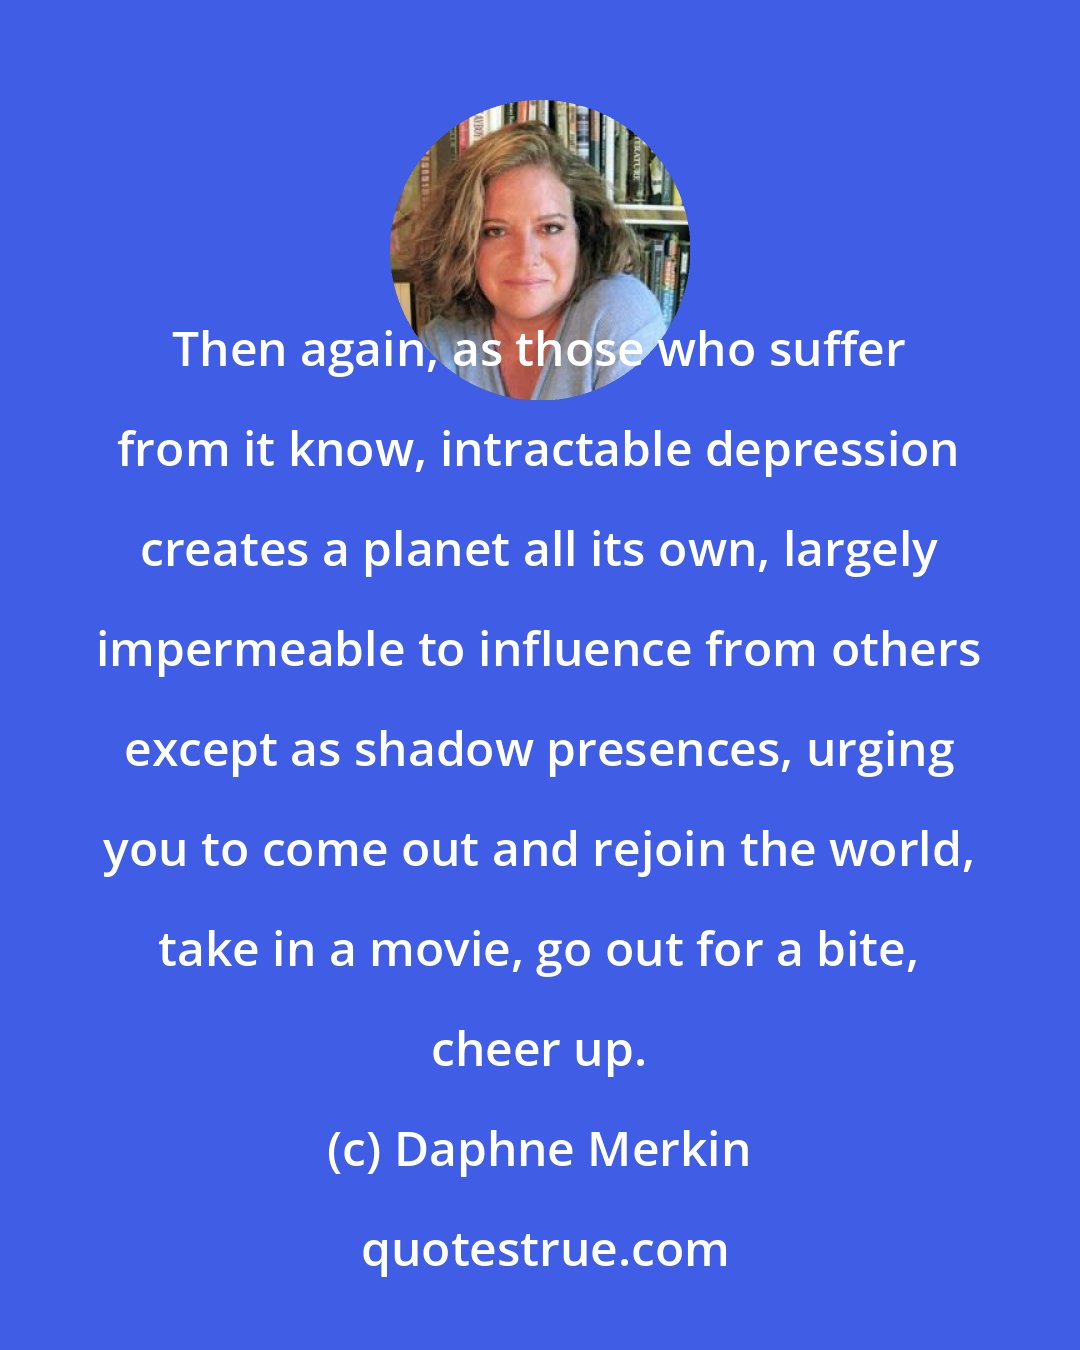 Daphne Merkin: Then again, as those who suffer from it know, intractable depression creates a planet all its own, largely impermeable to influence from others except as shadow presences, urging you to come out and rejoin the world, take in a movie, go out for a bite, cheer up.